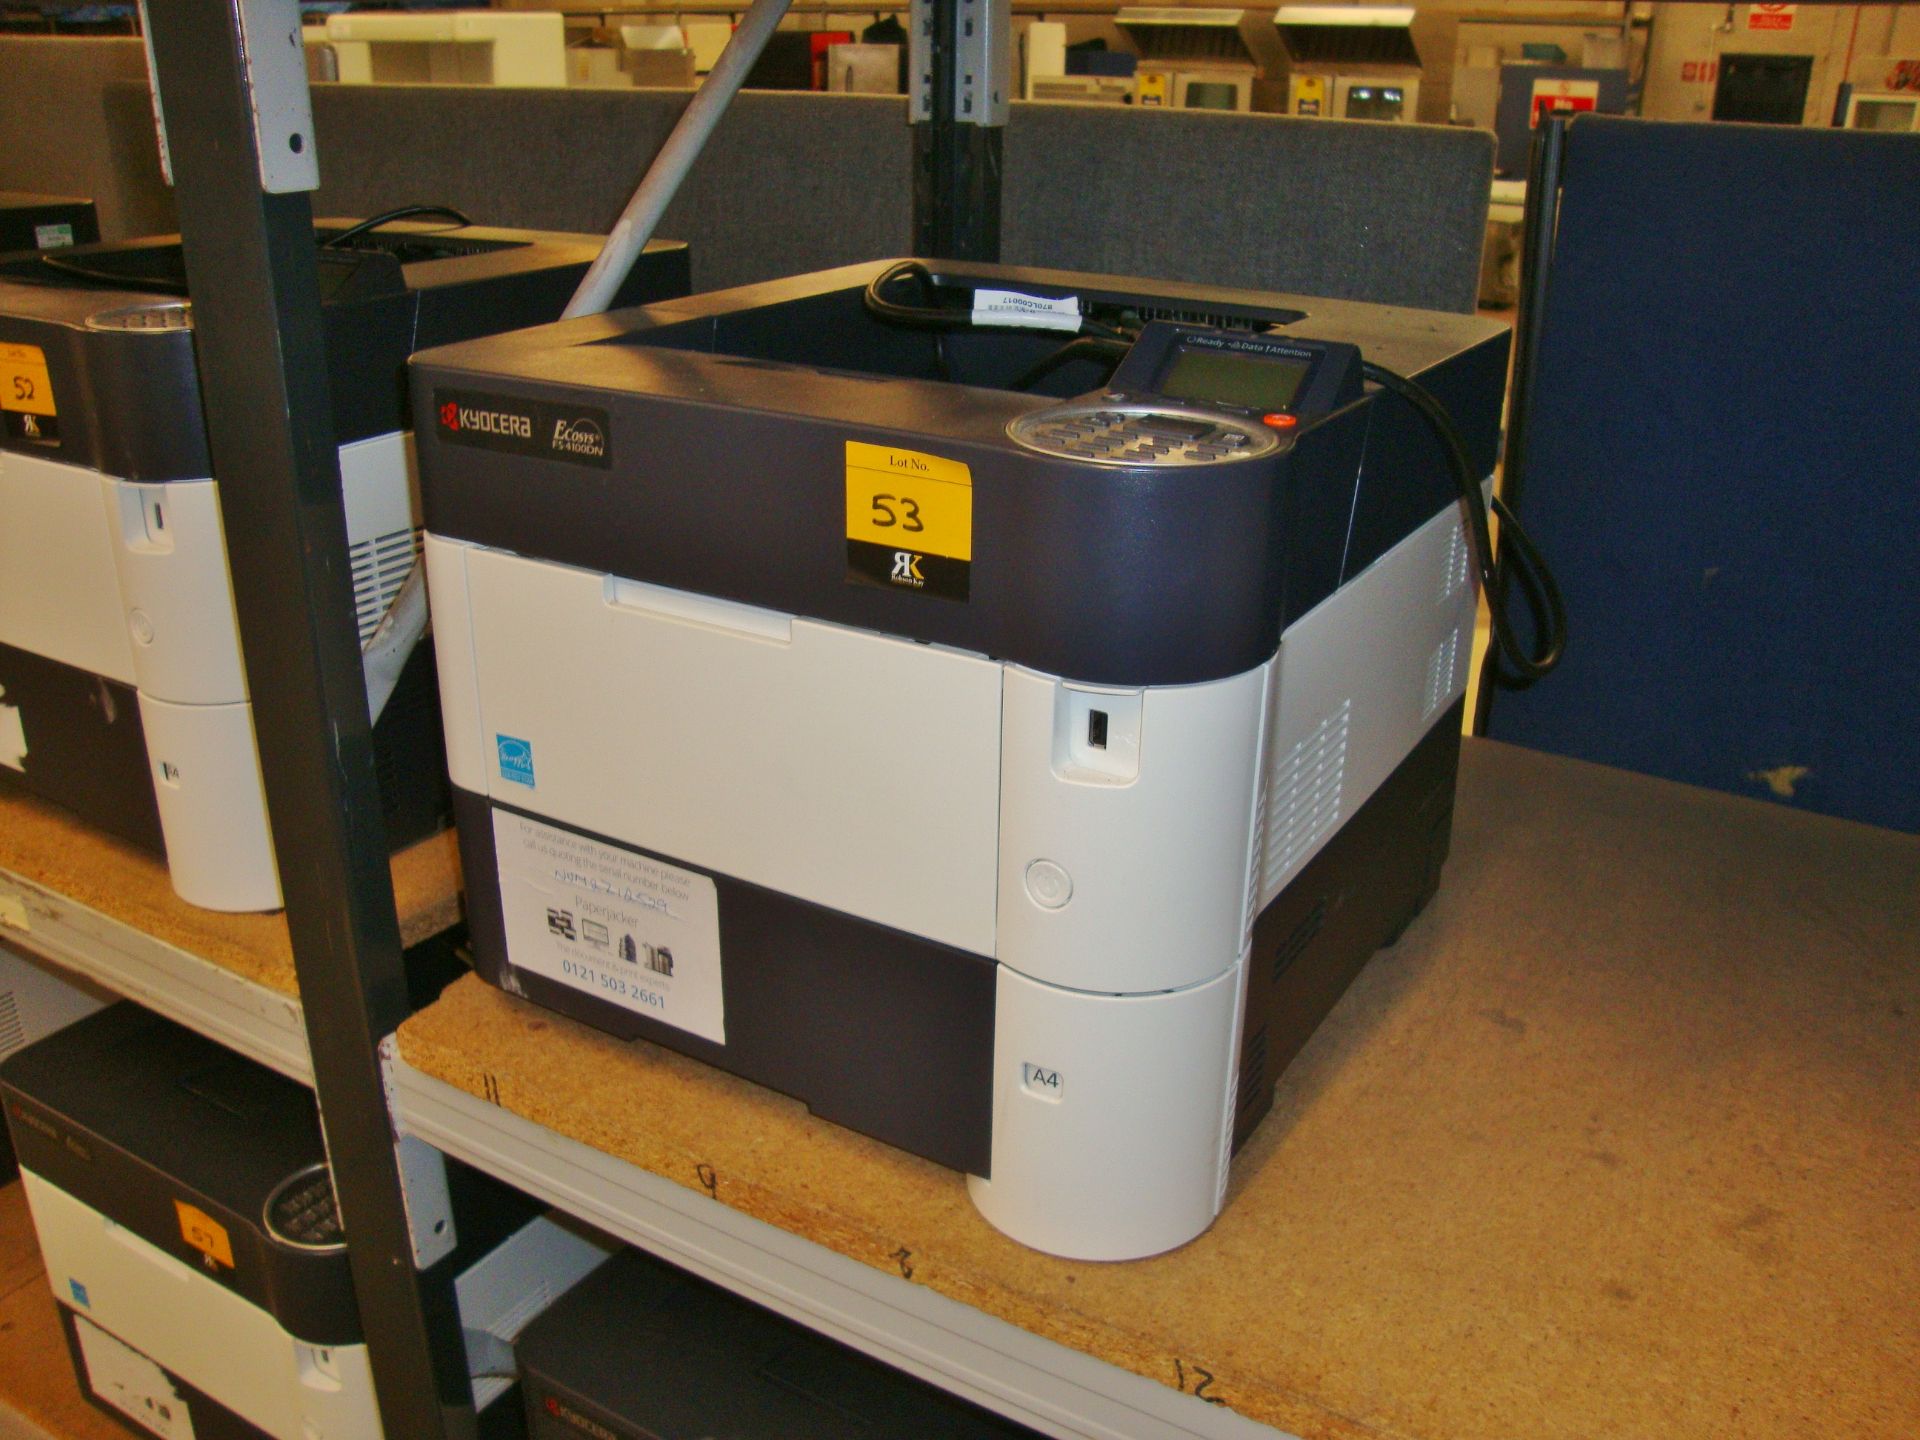 Kyocera model FS-4100DN A4 monolaser printer with up to 1,200 DPI resolution, 45 pages per minute, - Image 3 of 3